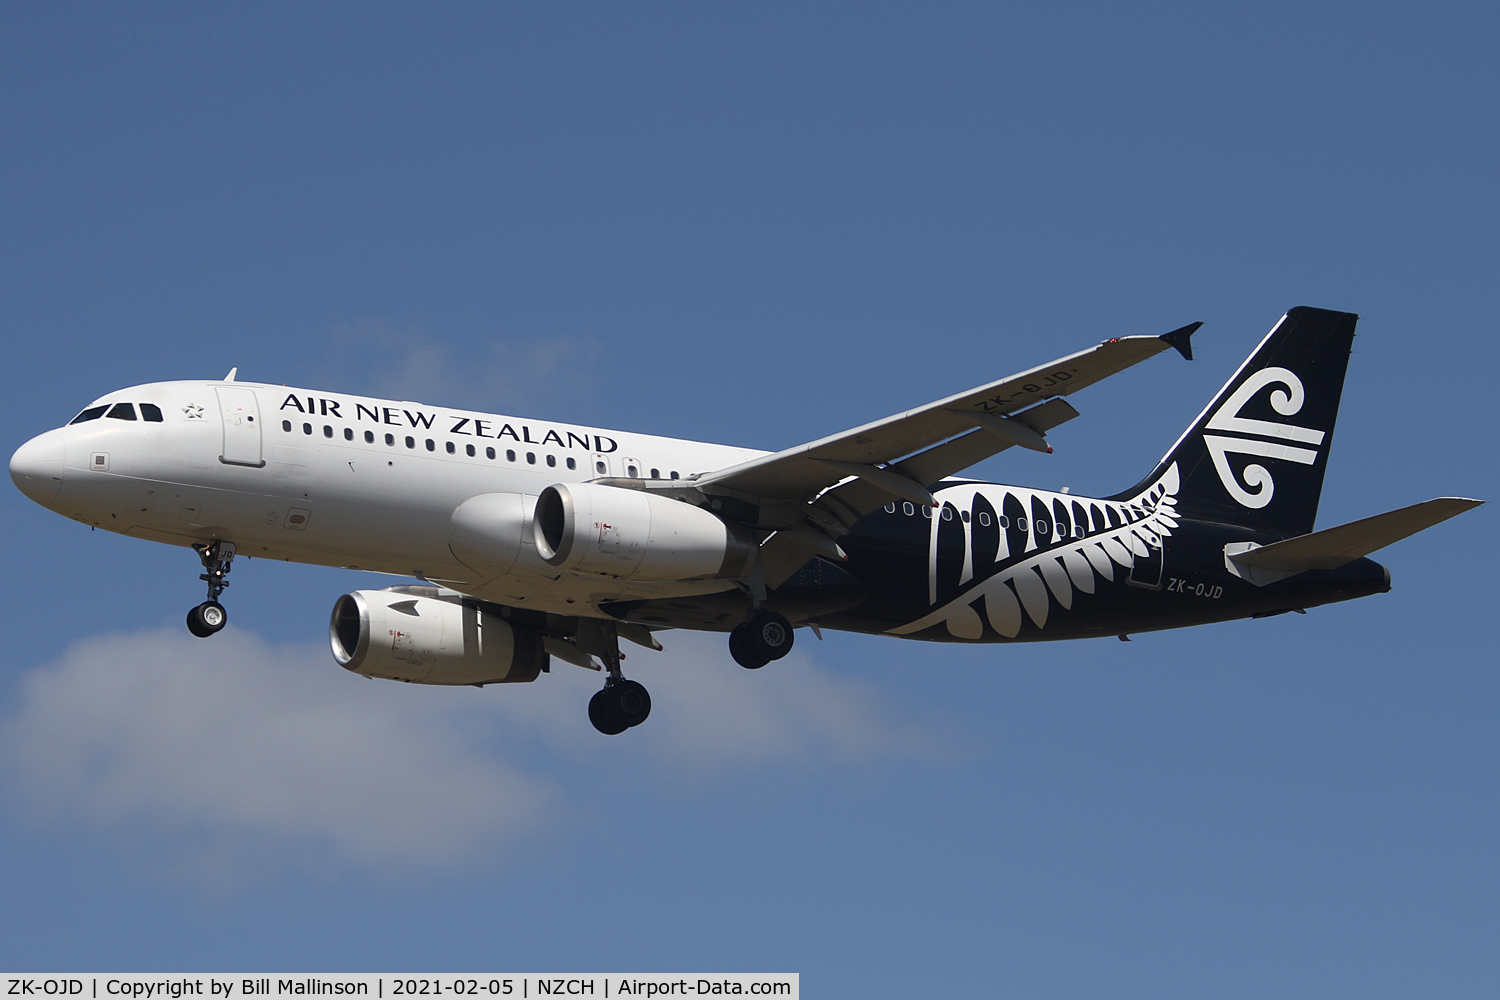 ZK-OJD, 2003 Airbus A320-232 C/N 2130, NZ546 from AKL